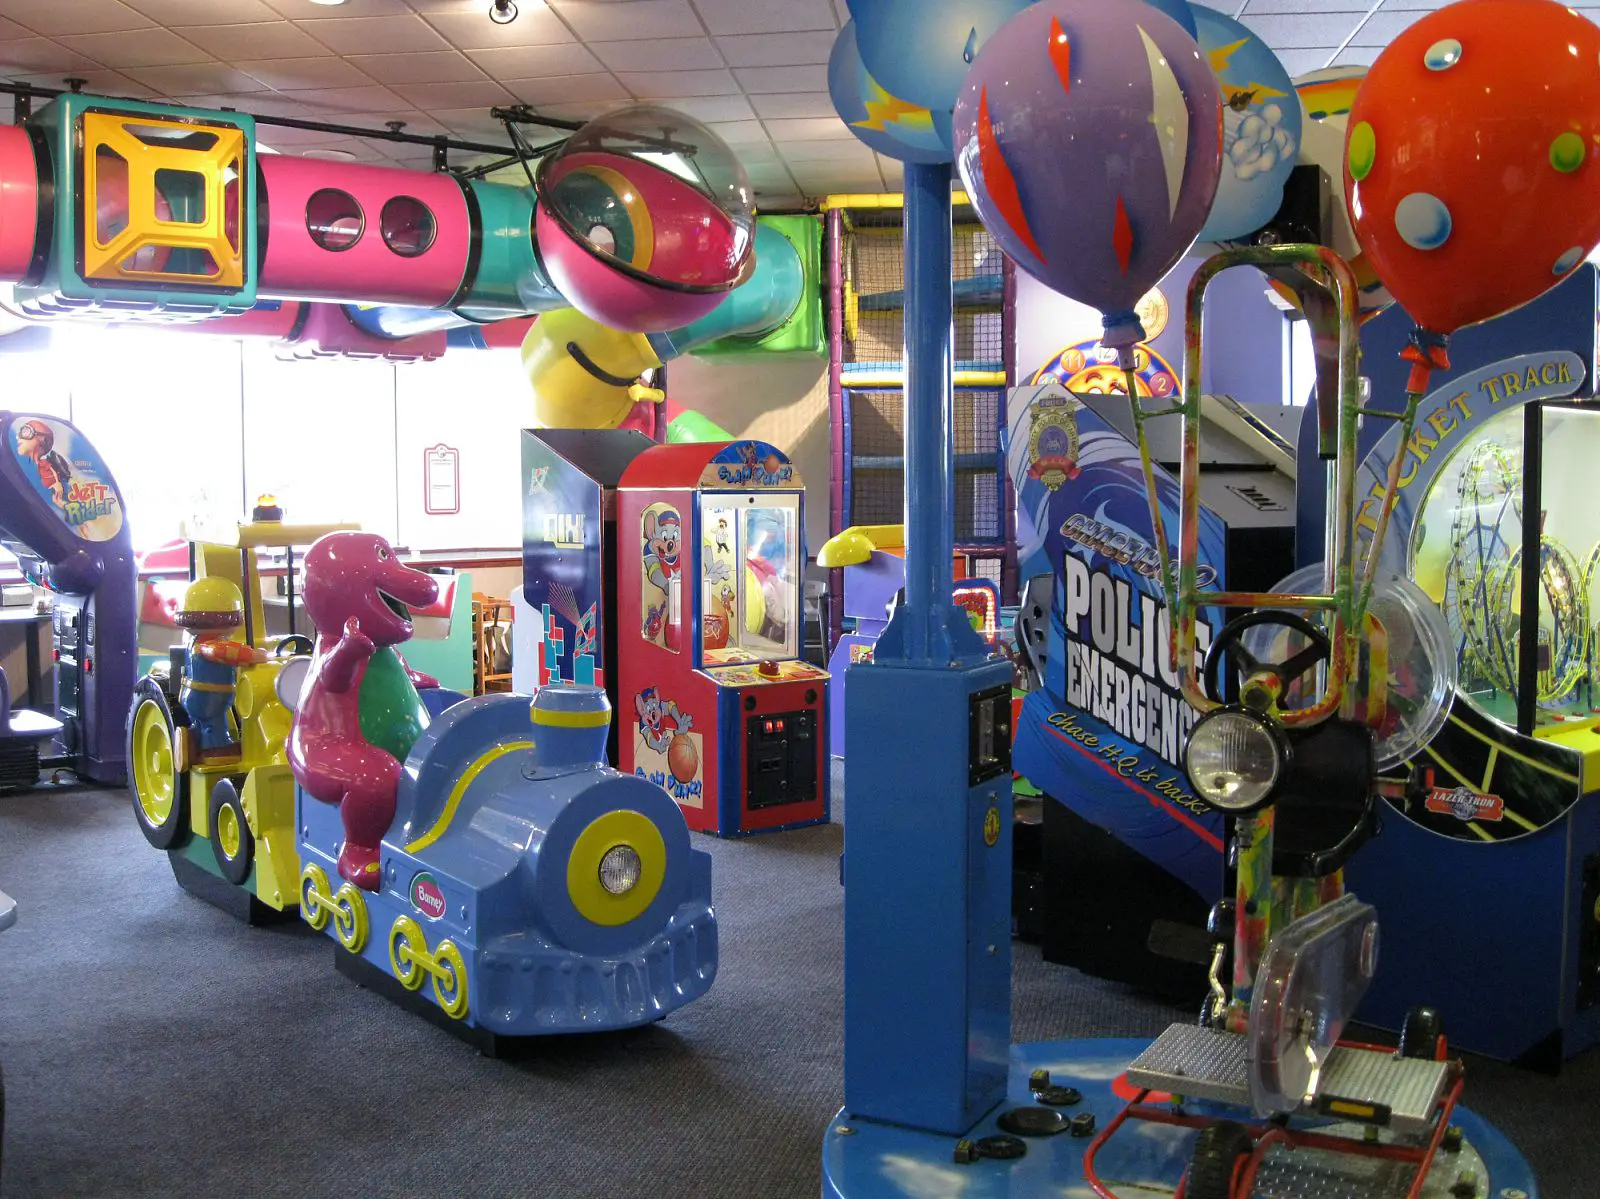 Notes from a Mom in Chapel Hill (A Guide): Chuck E. Cheese